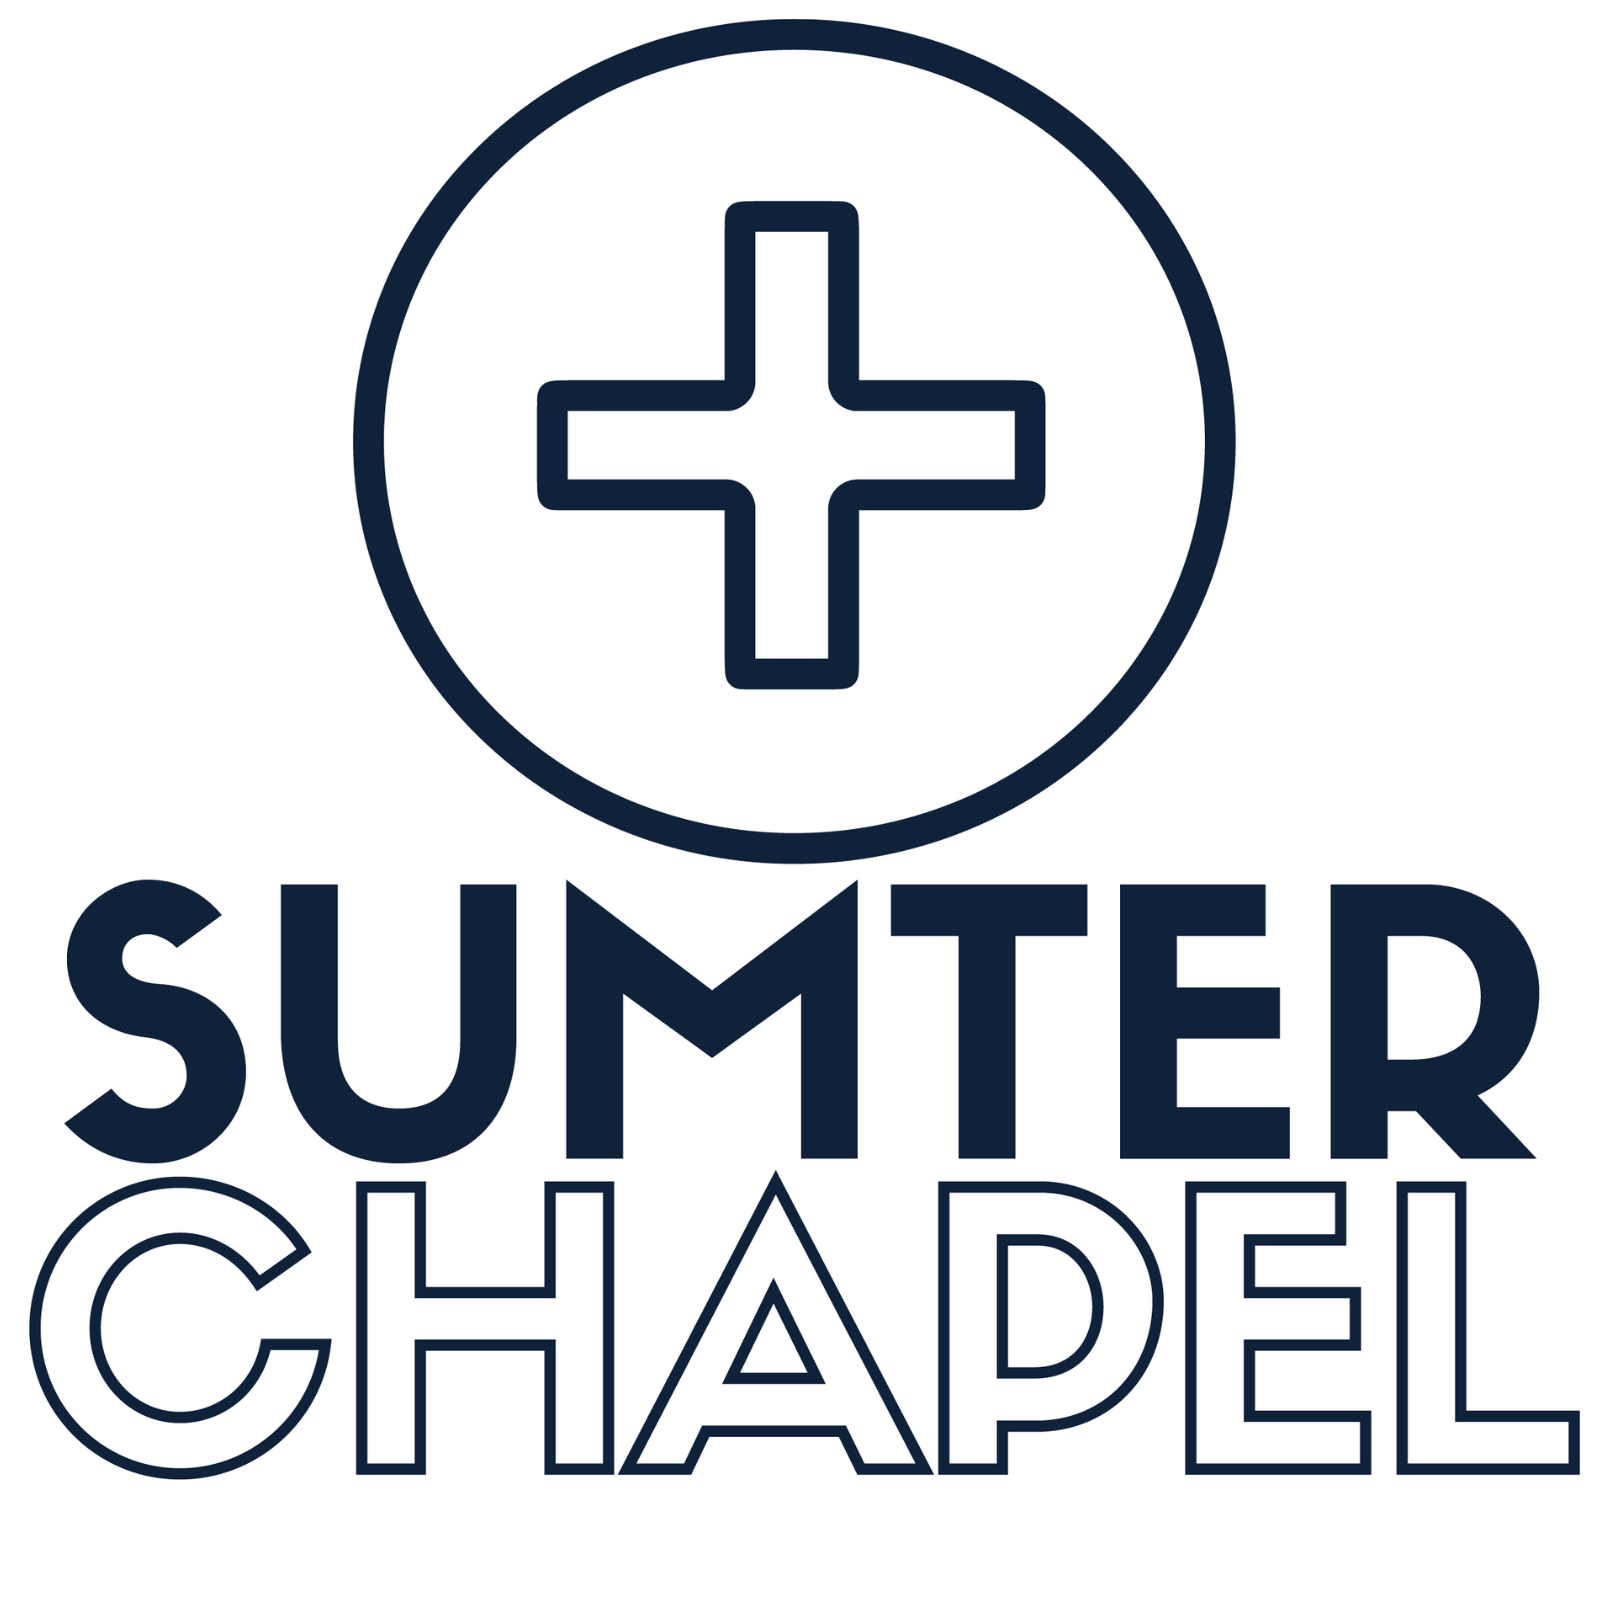 Sumter Chapel Weekly Podcast